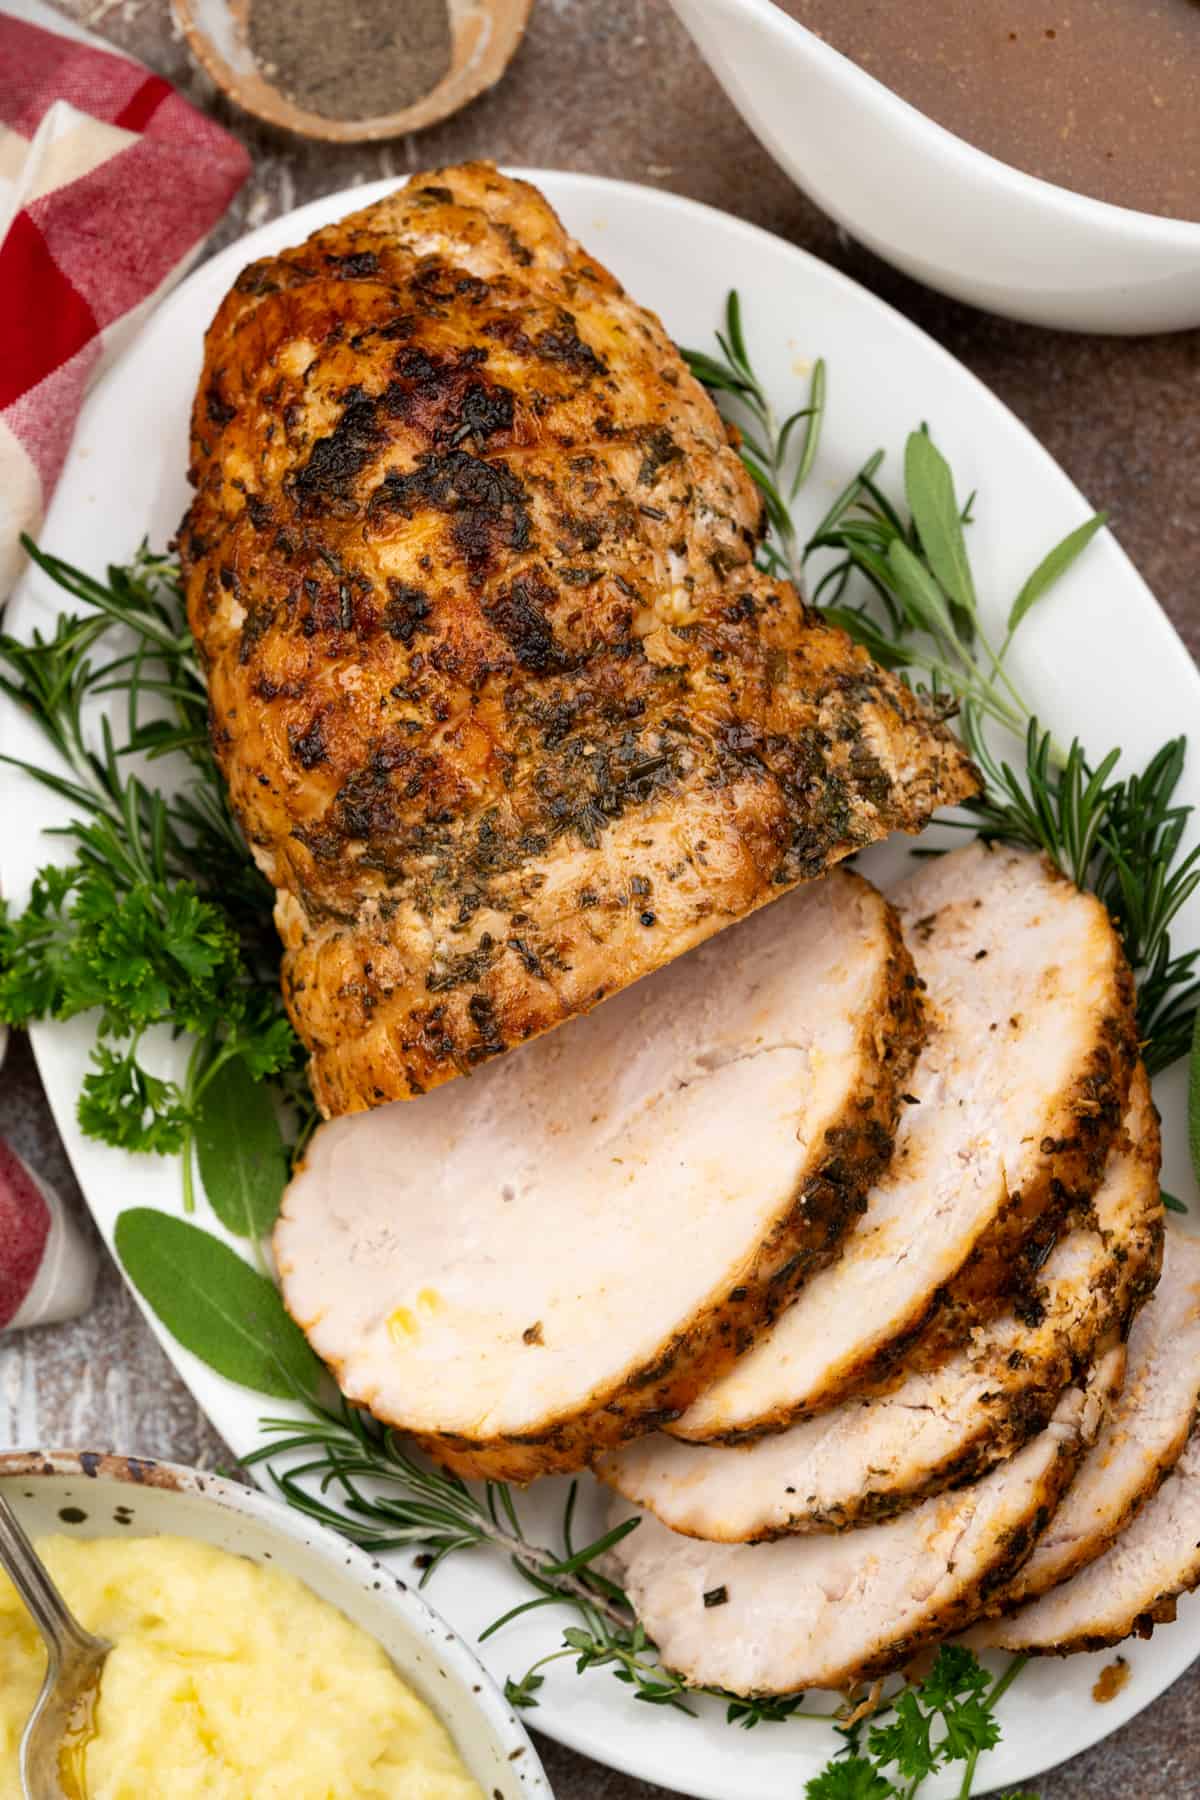 Shows half of a roasted turkey breast along with the other half sliced and plated on a bed of herbs.